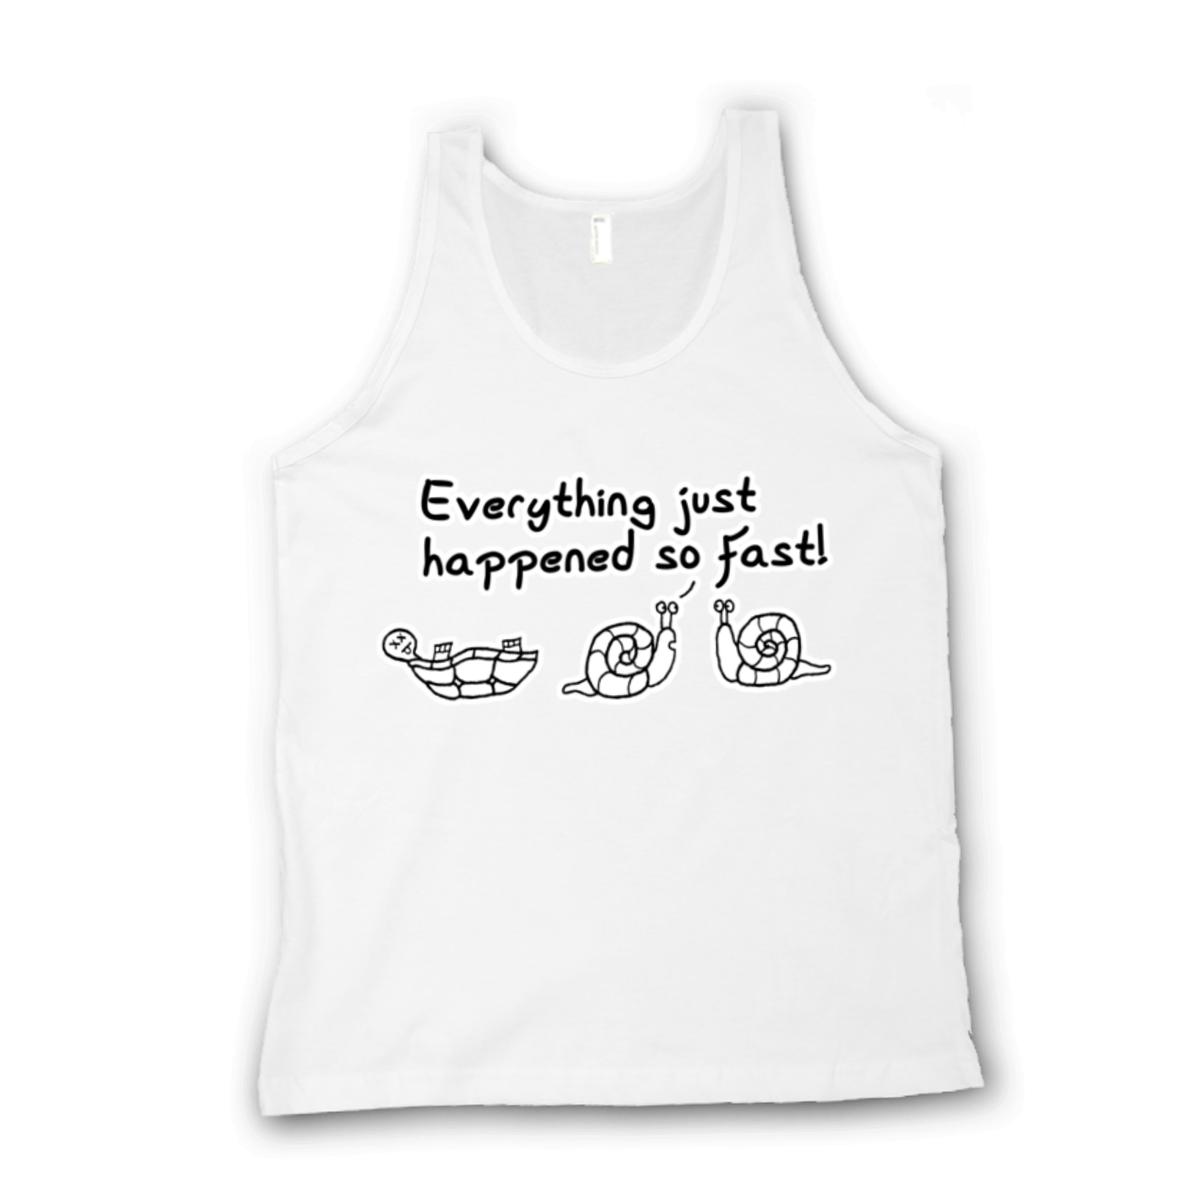 Happened So Fast Unisex Tank Top Extra Small white